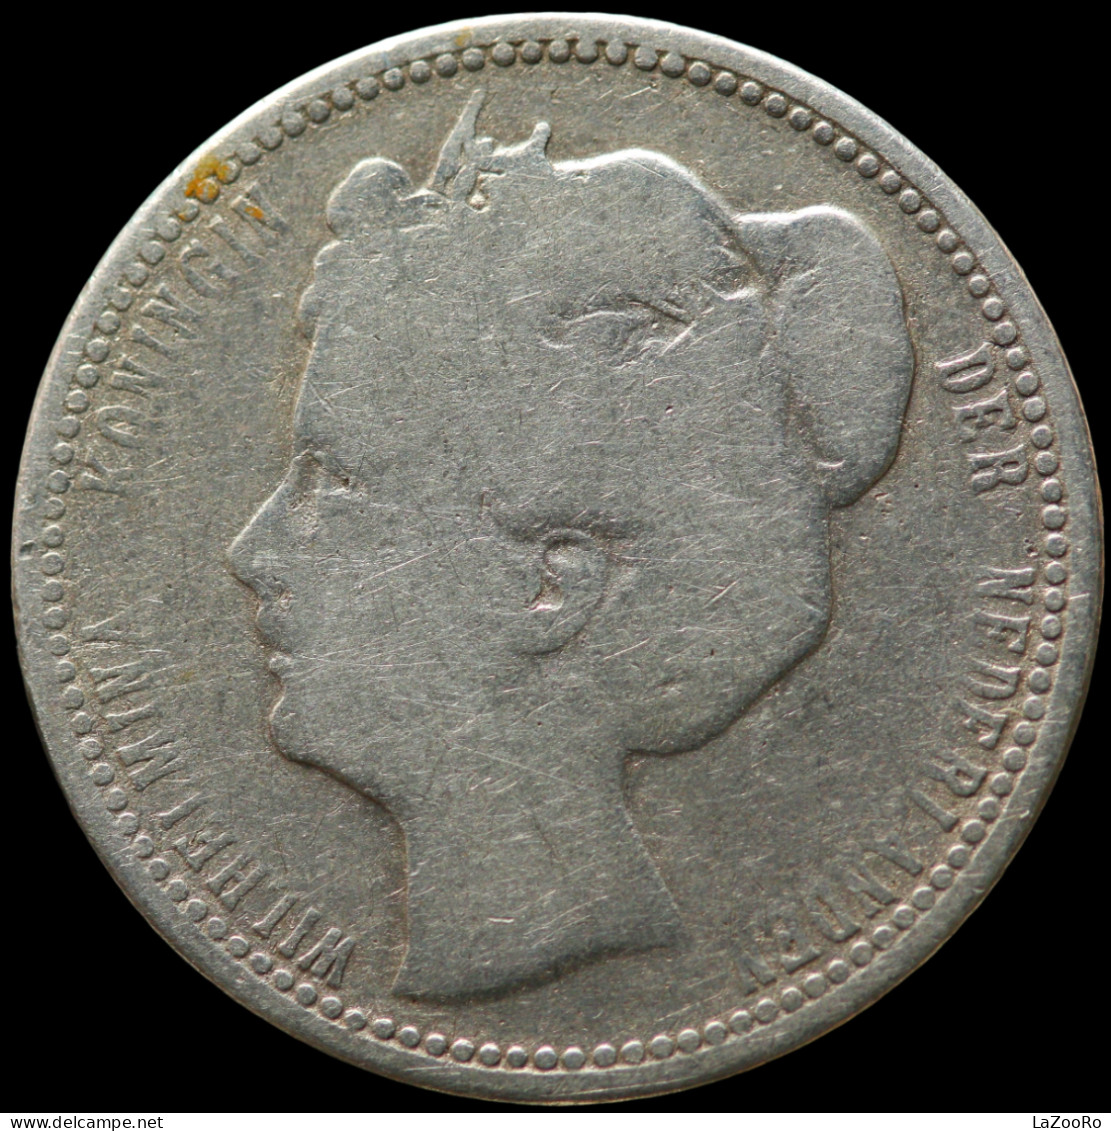 LaZooRo: Netherlands 25 Cents 1905 VF - Silver - 25 Cent